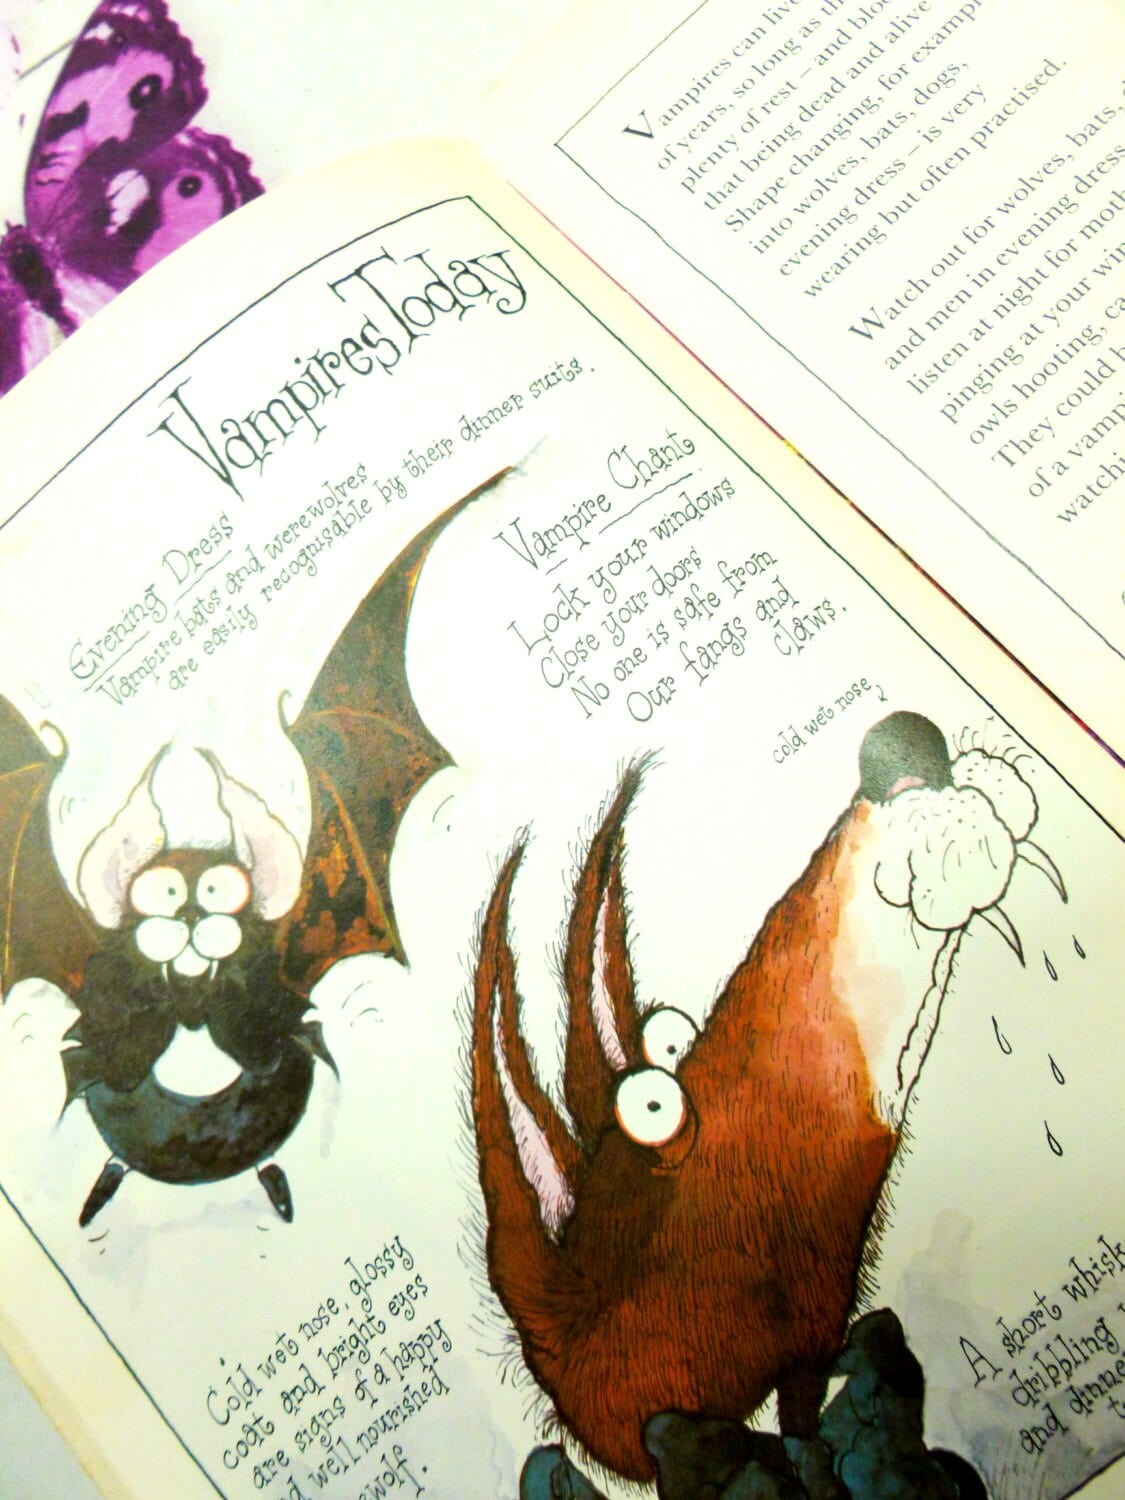 Vampires by Colin Hawkins Humorous Childrens Comic Spooky Book about Vampires and their lifestyles and history